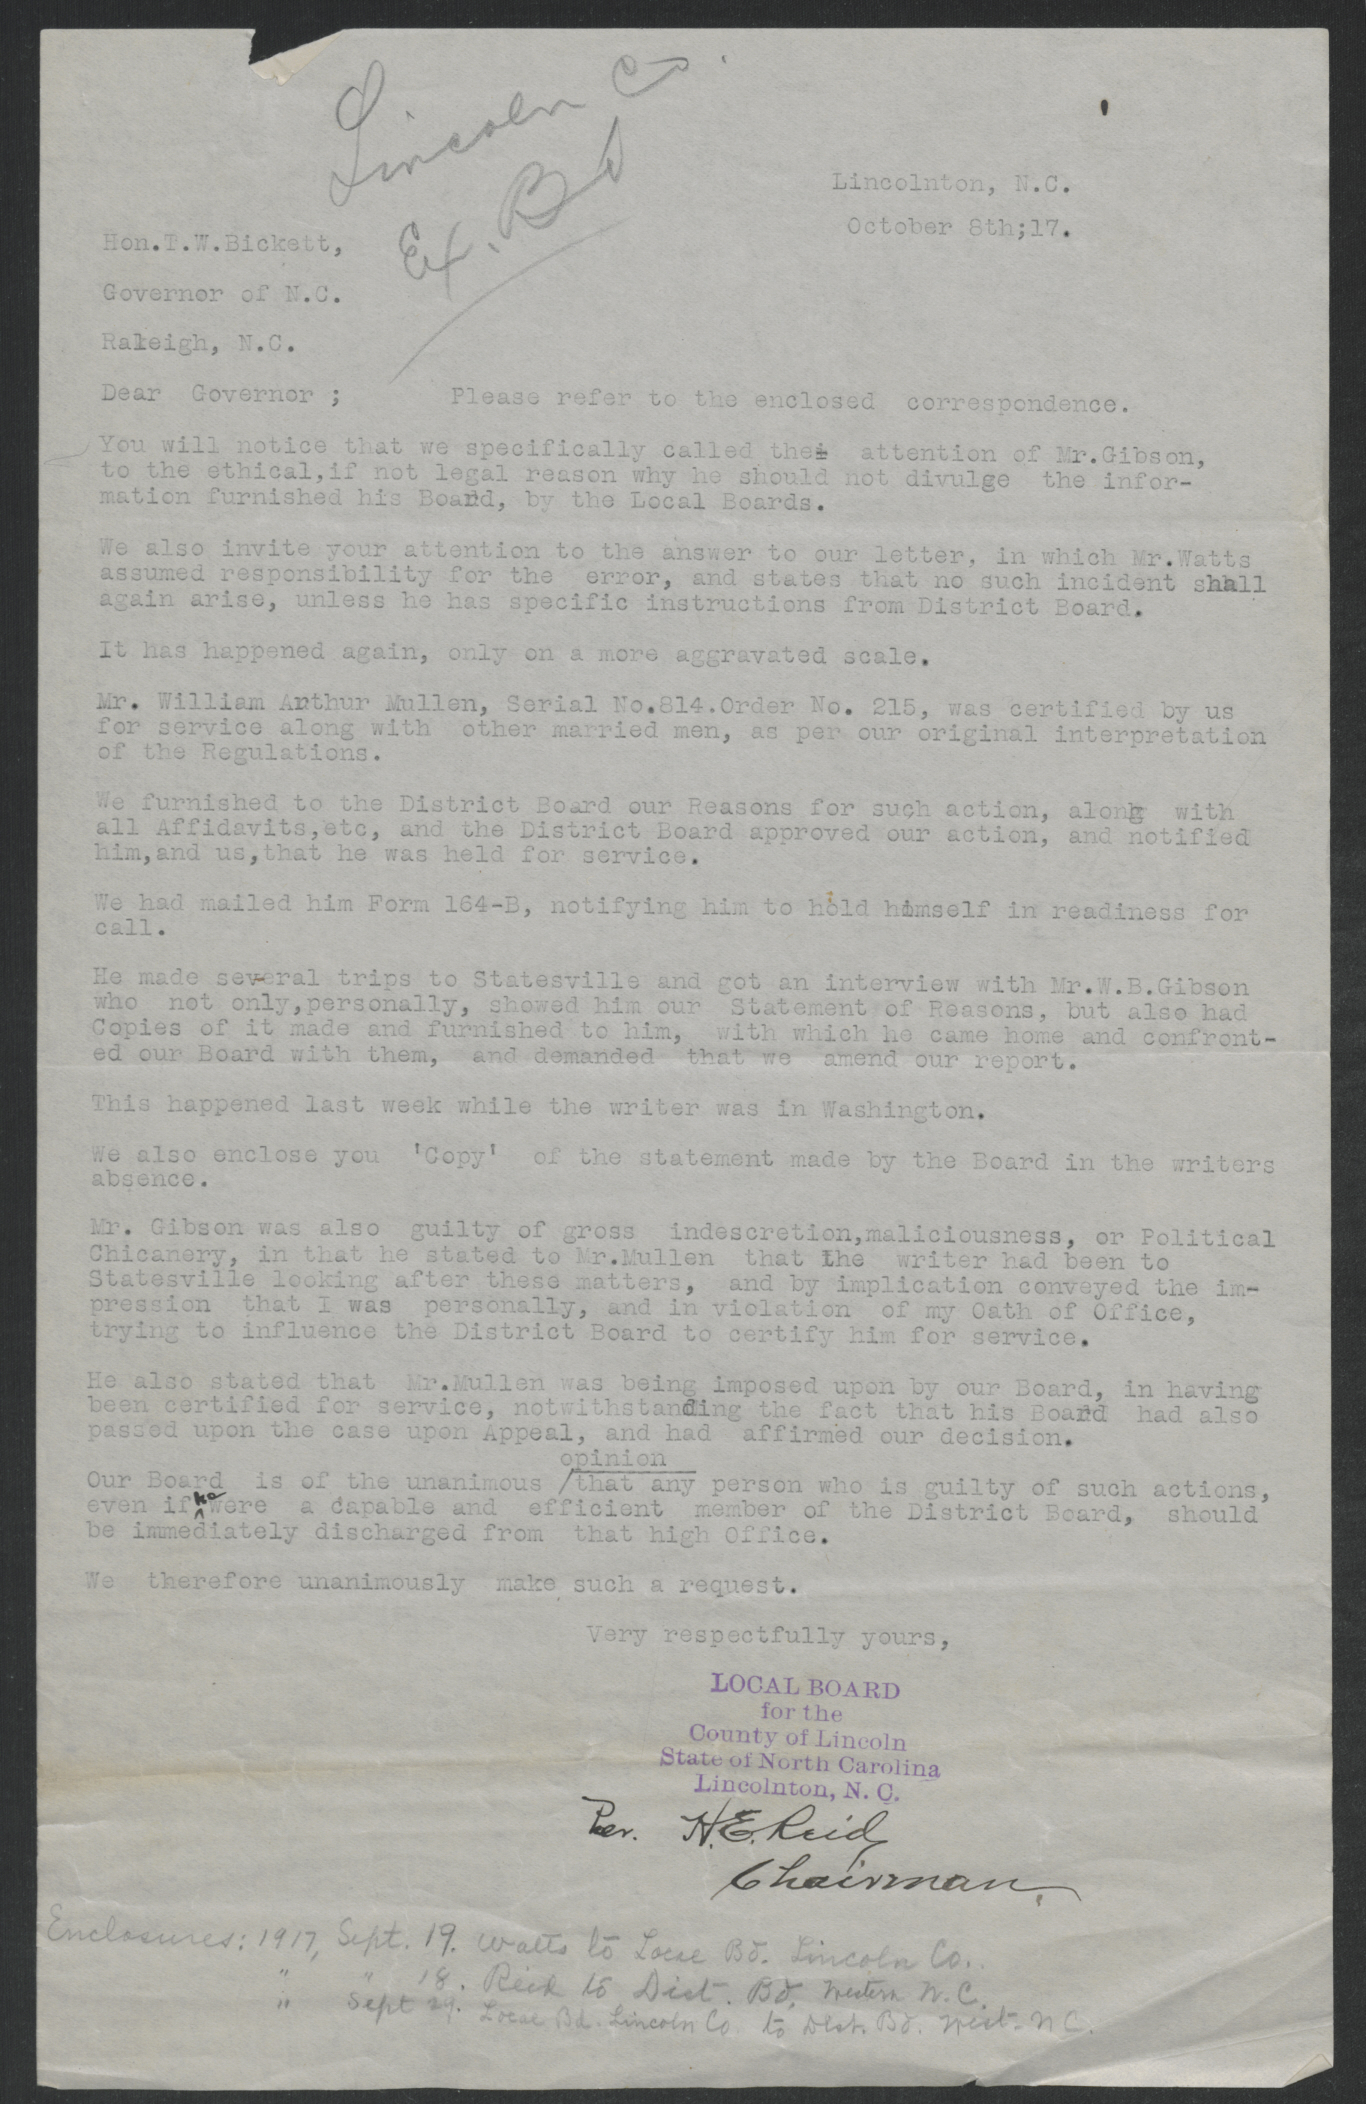 Letter from Harry E. Reid to Thomas W. Bickett, October 8, 1917